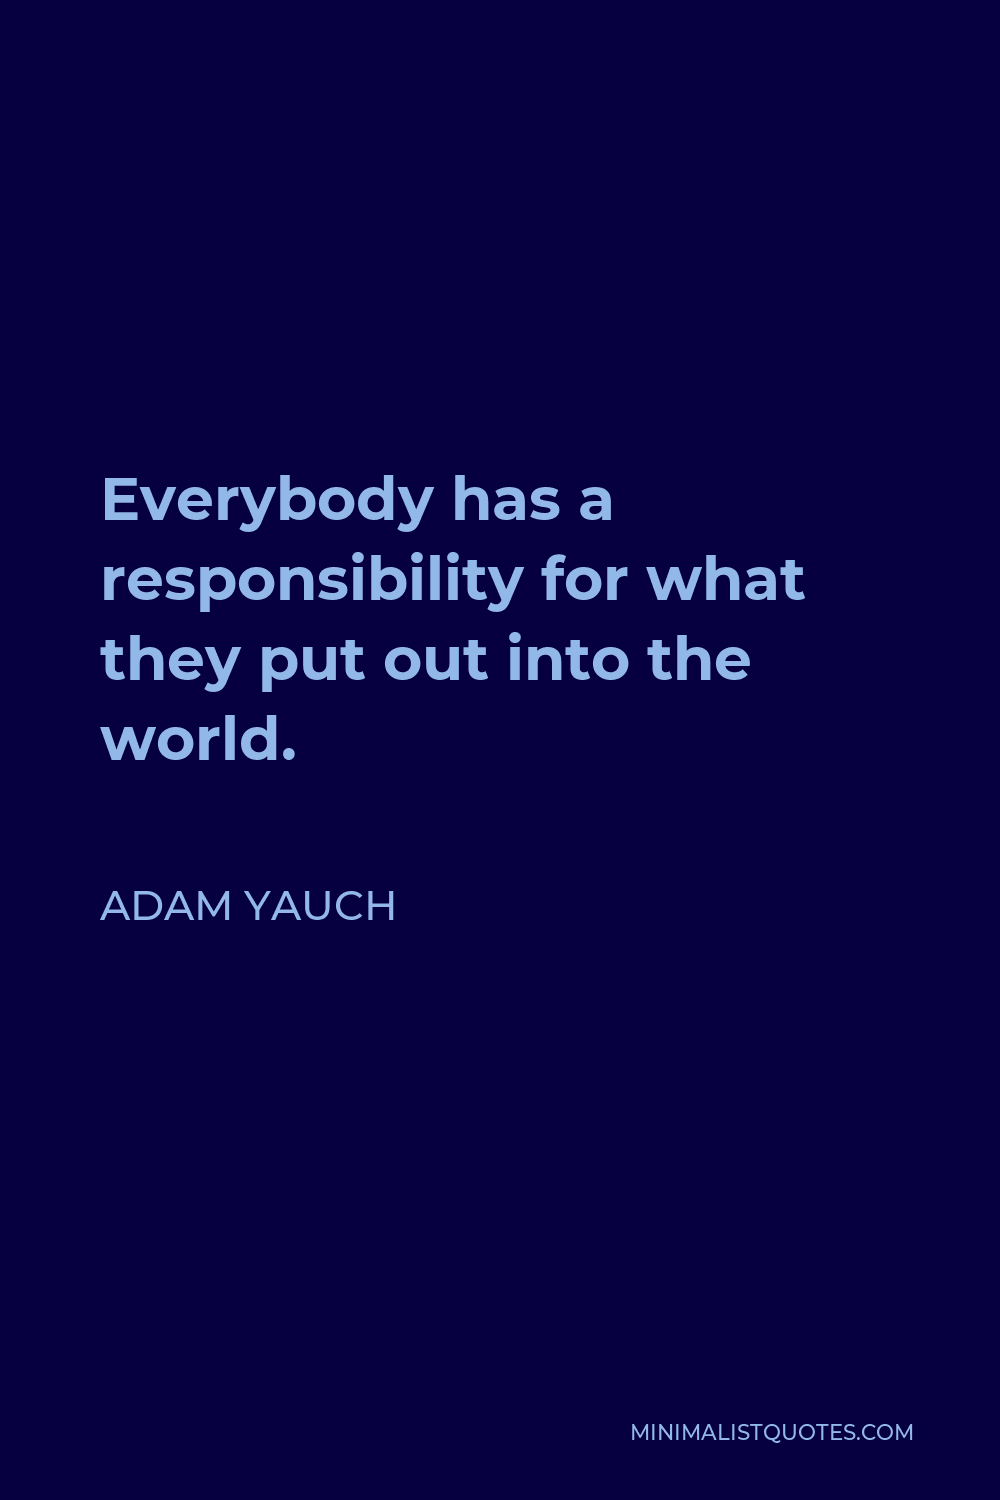 Adam Yauch Quote - Everybody has a responsibility for what they put out into the world.